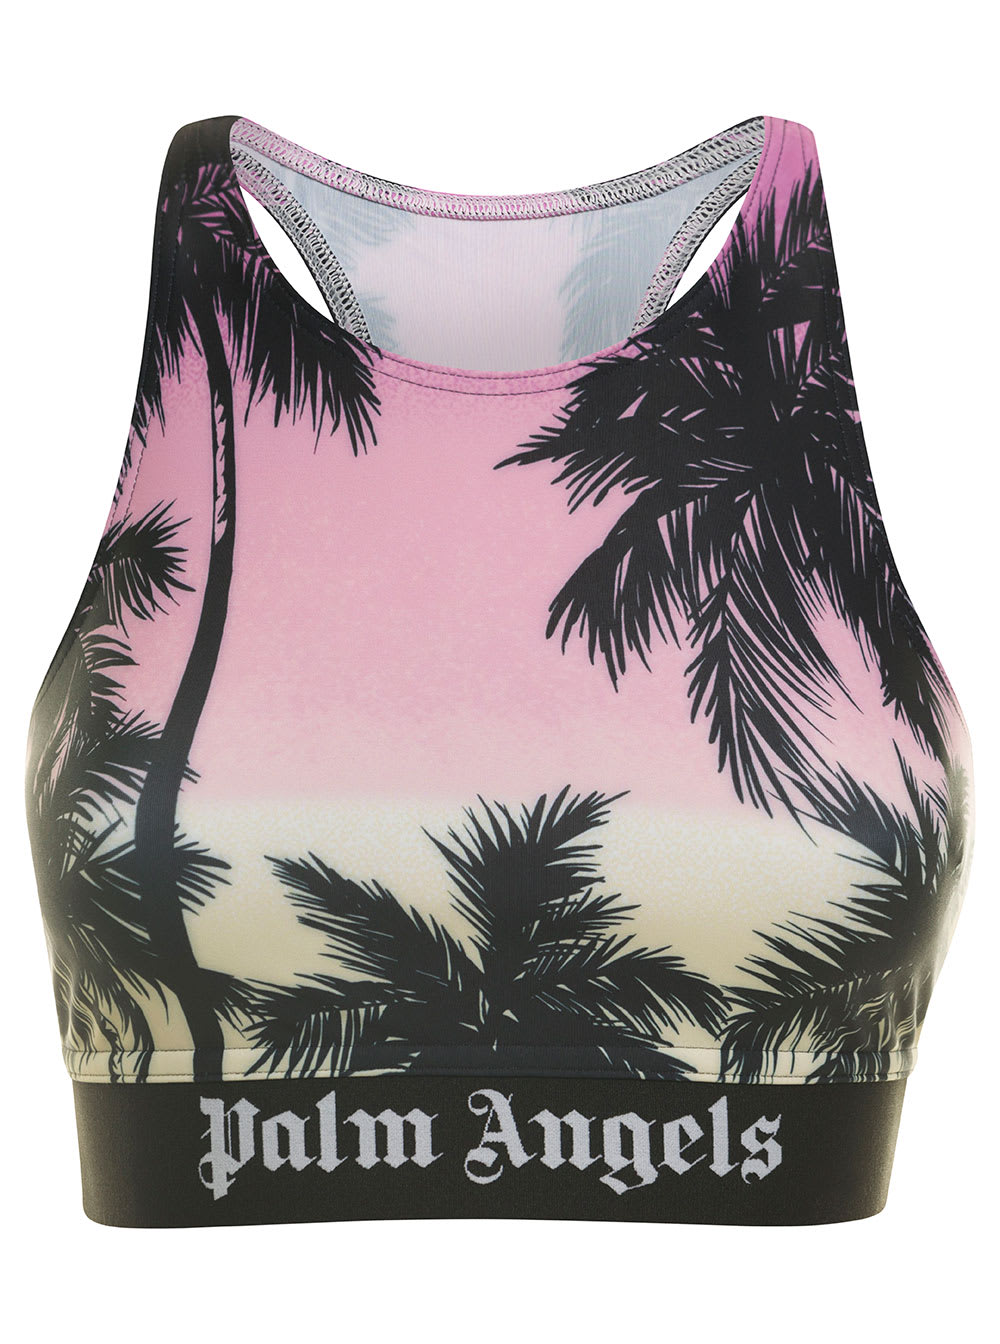 Women's Sports Top With Logo Band by Palm Angels